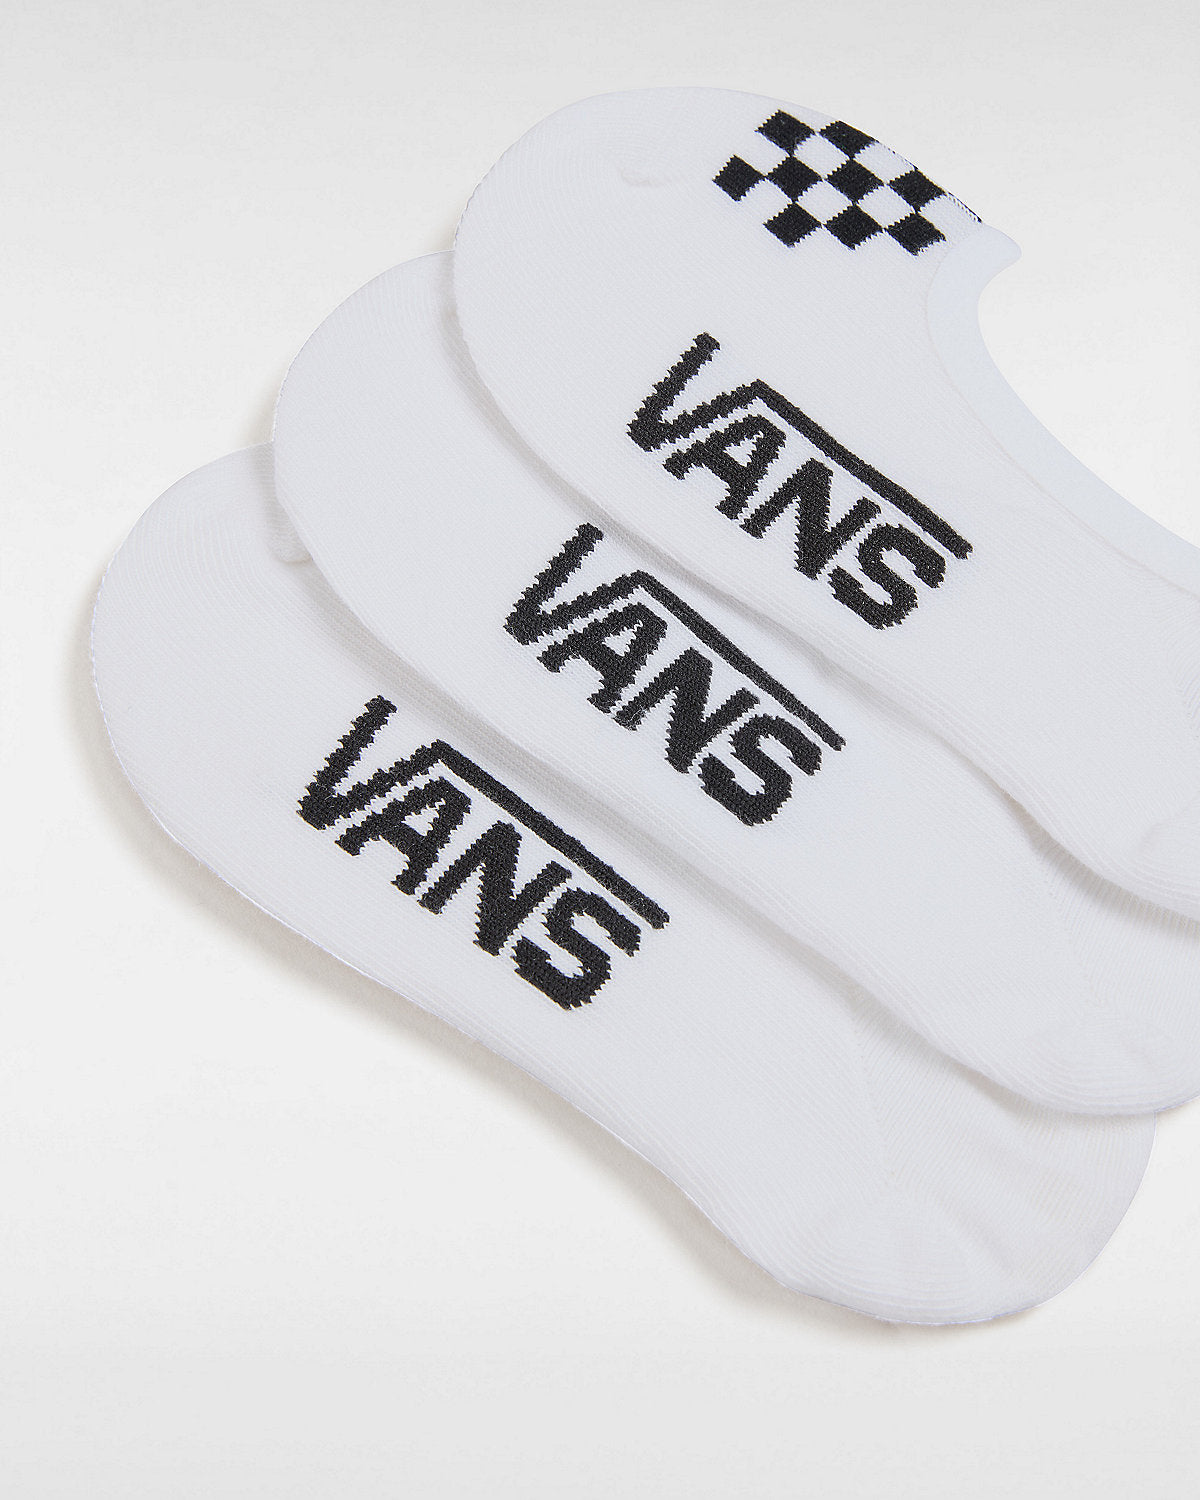 VANS Kids Classic Canoodle Socks (3 Pairs) - White